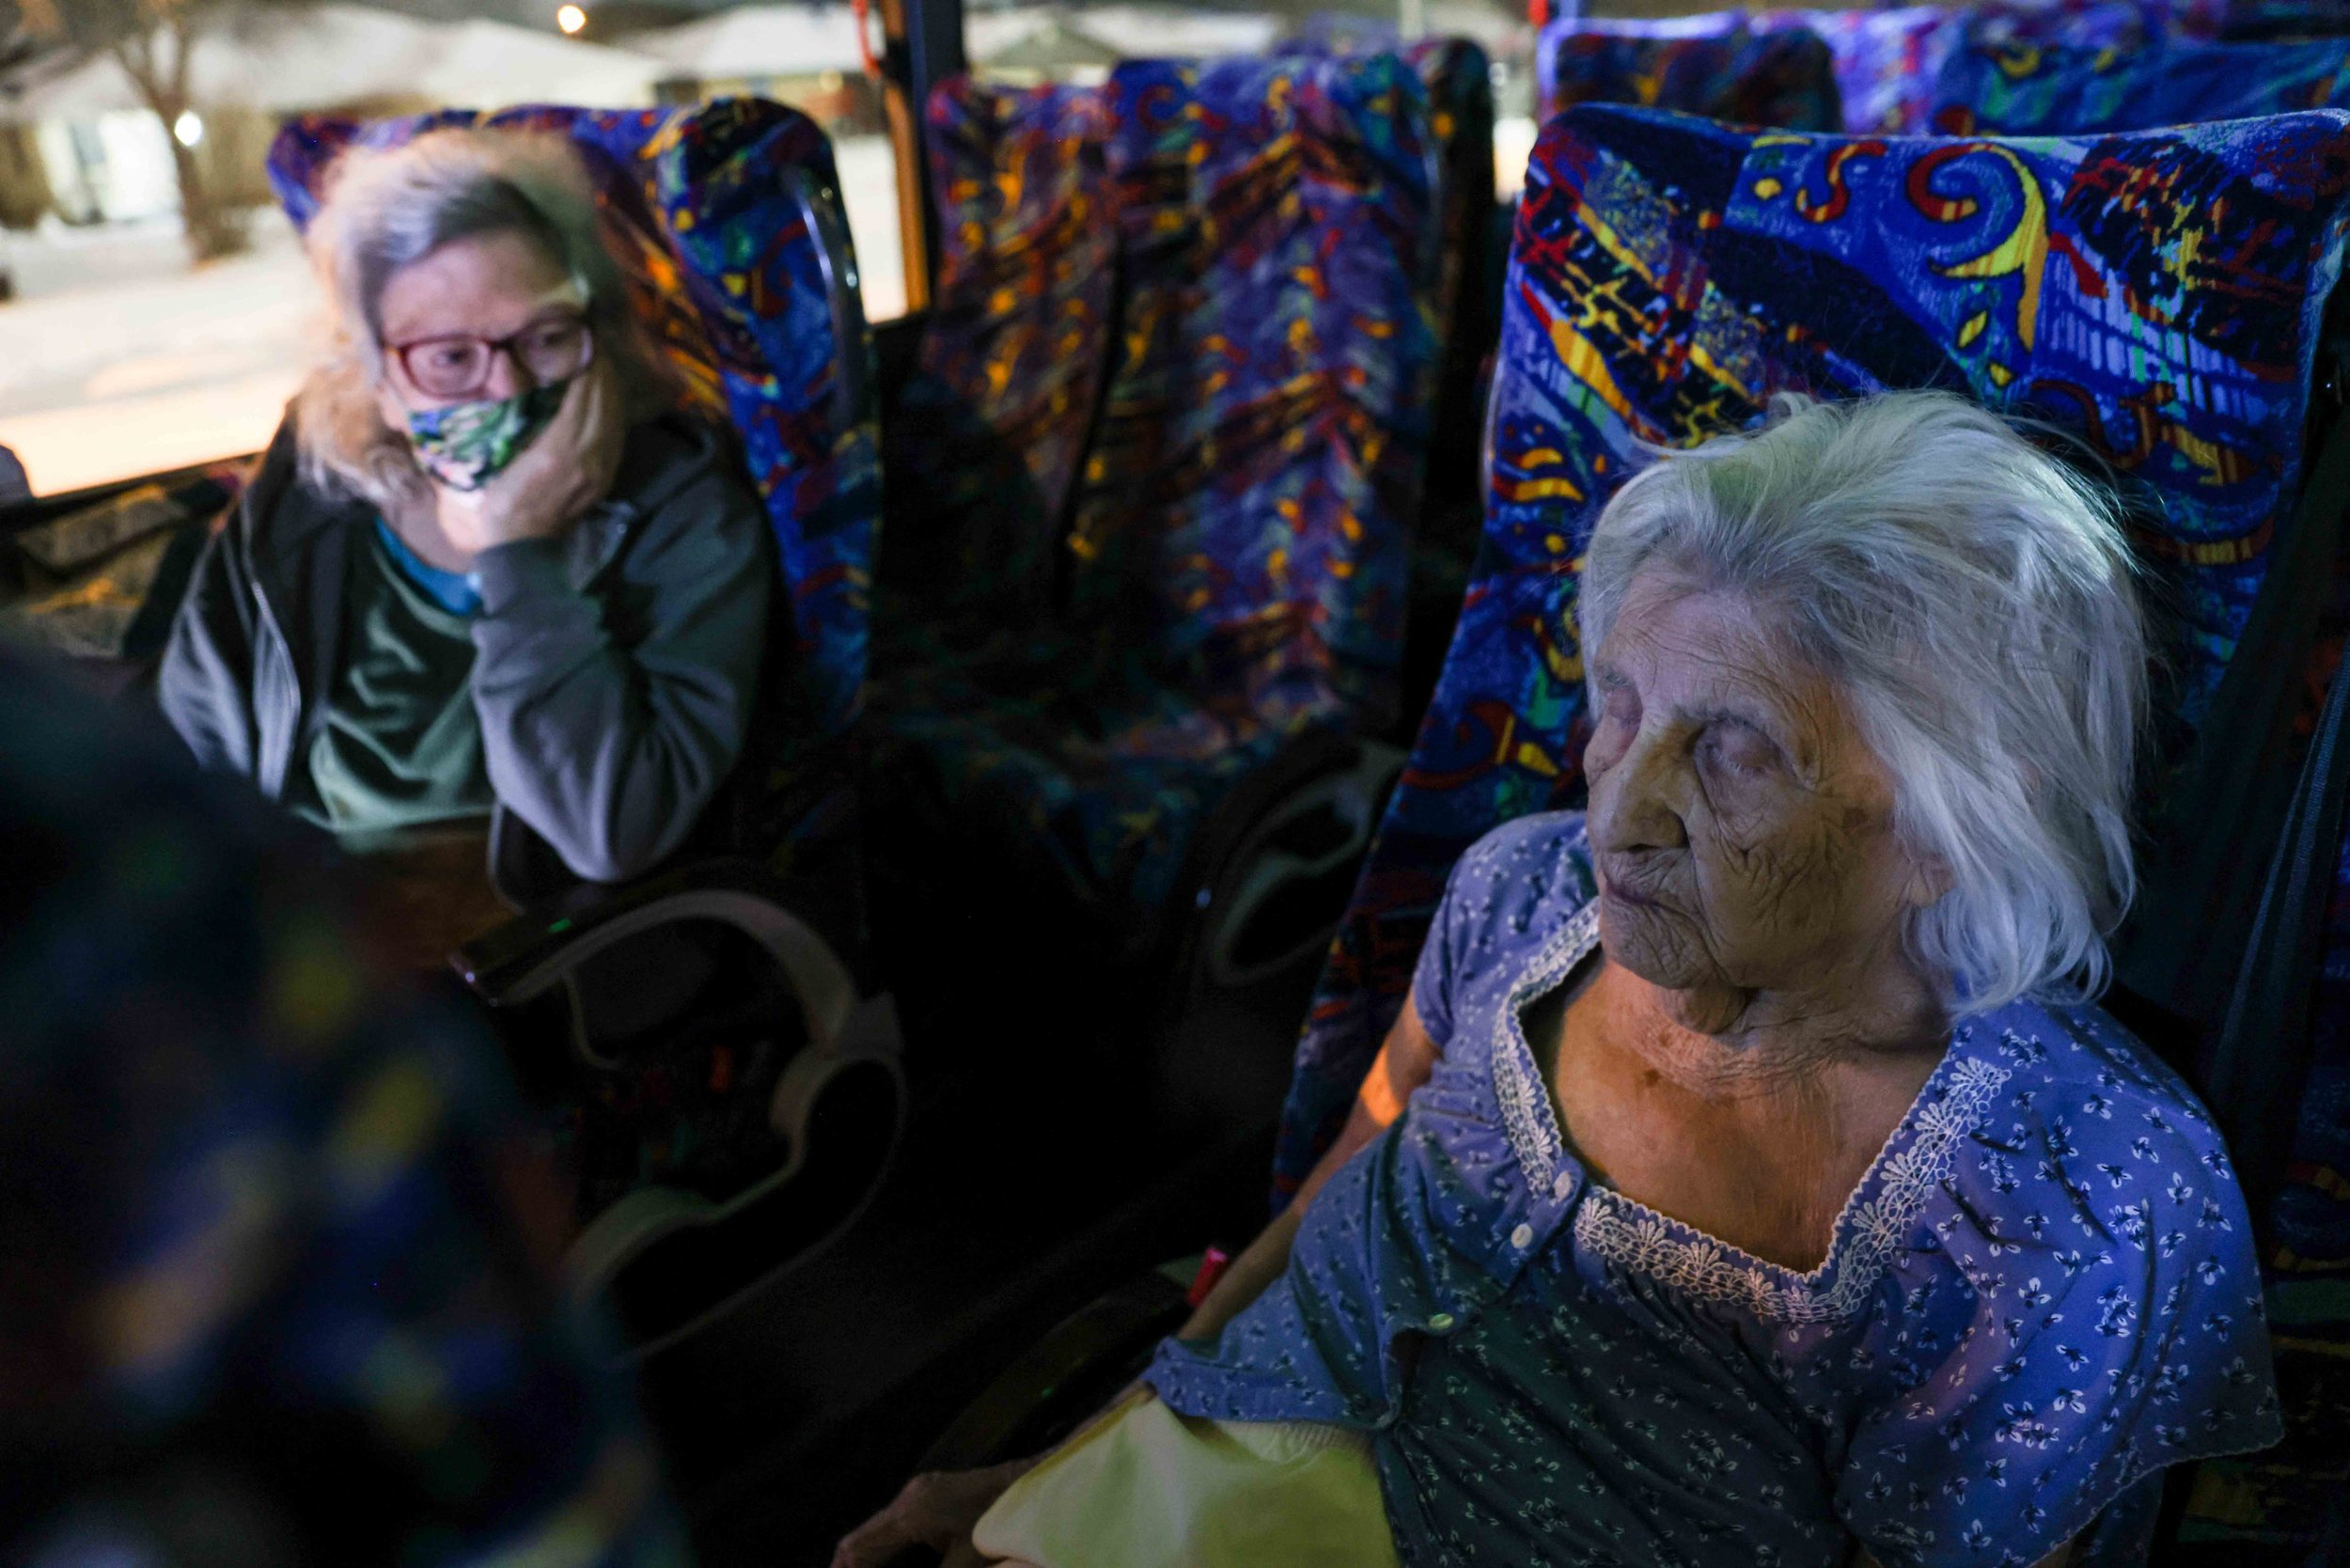  Gloria Sanders, 76, looks at her mother, Maria Barajas, who is 100 years old and suffers from severe dementia, that sleeps sitting on a bus seat that serves as warming center located in Pleasant Oaks Recreation Center in Dallas on Wednesday, Februar